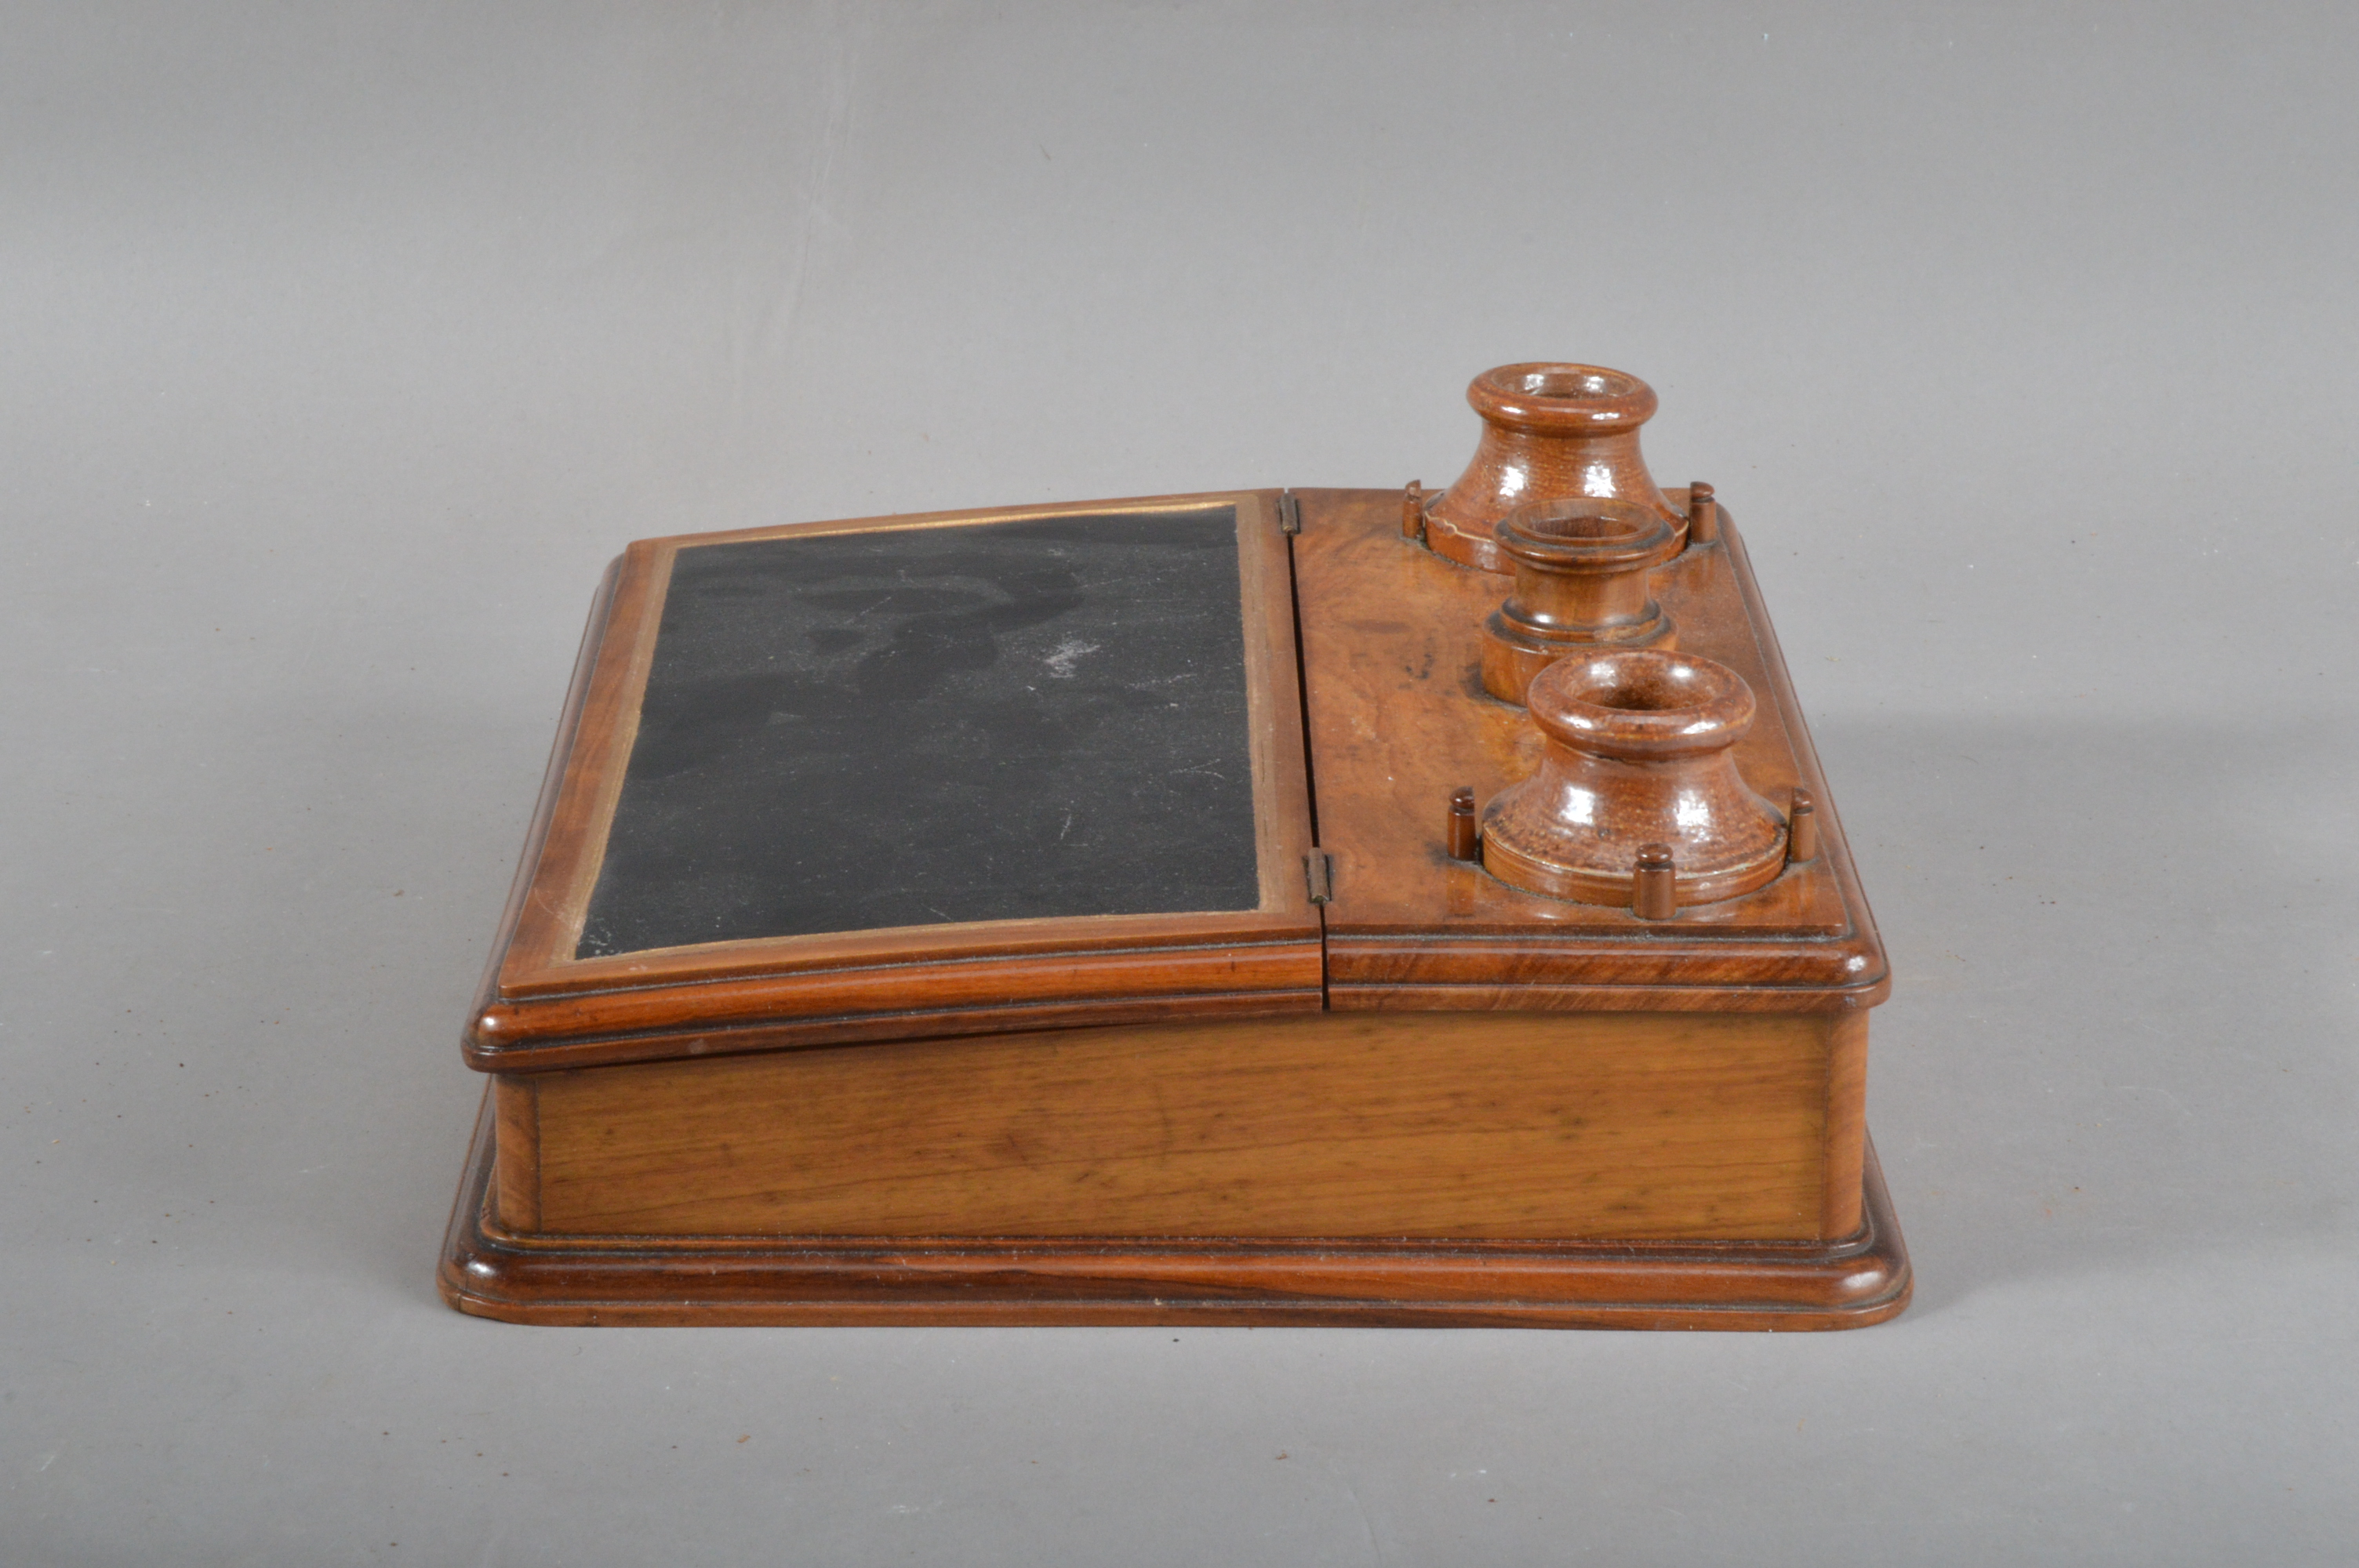 A 19th century olivewood and stoneware inkwell, two removable stoneware inkwells with a central - Image 4 of 4